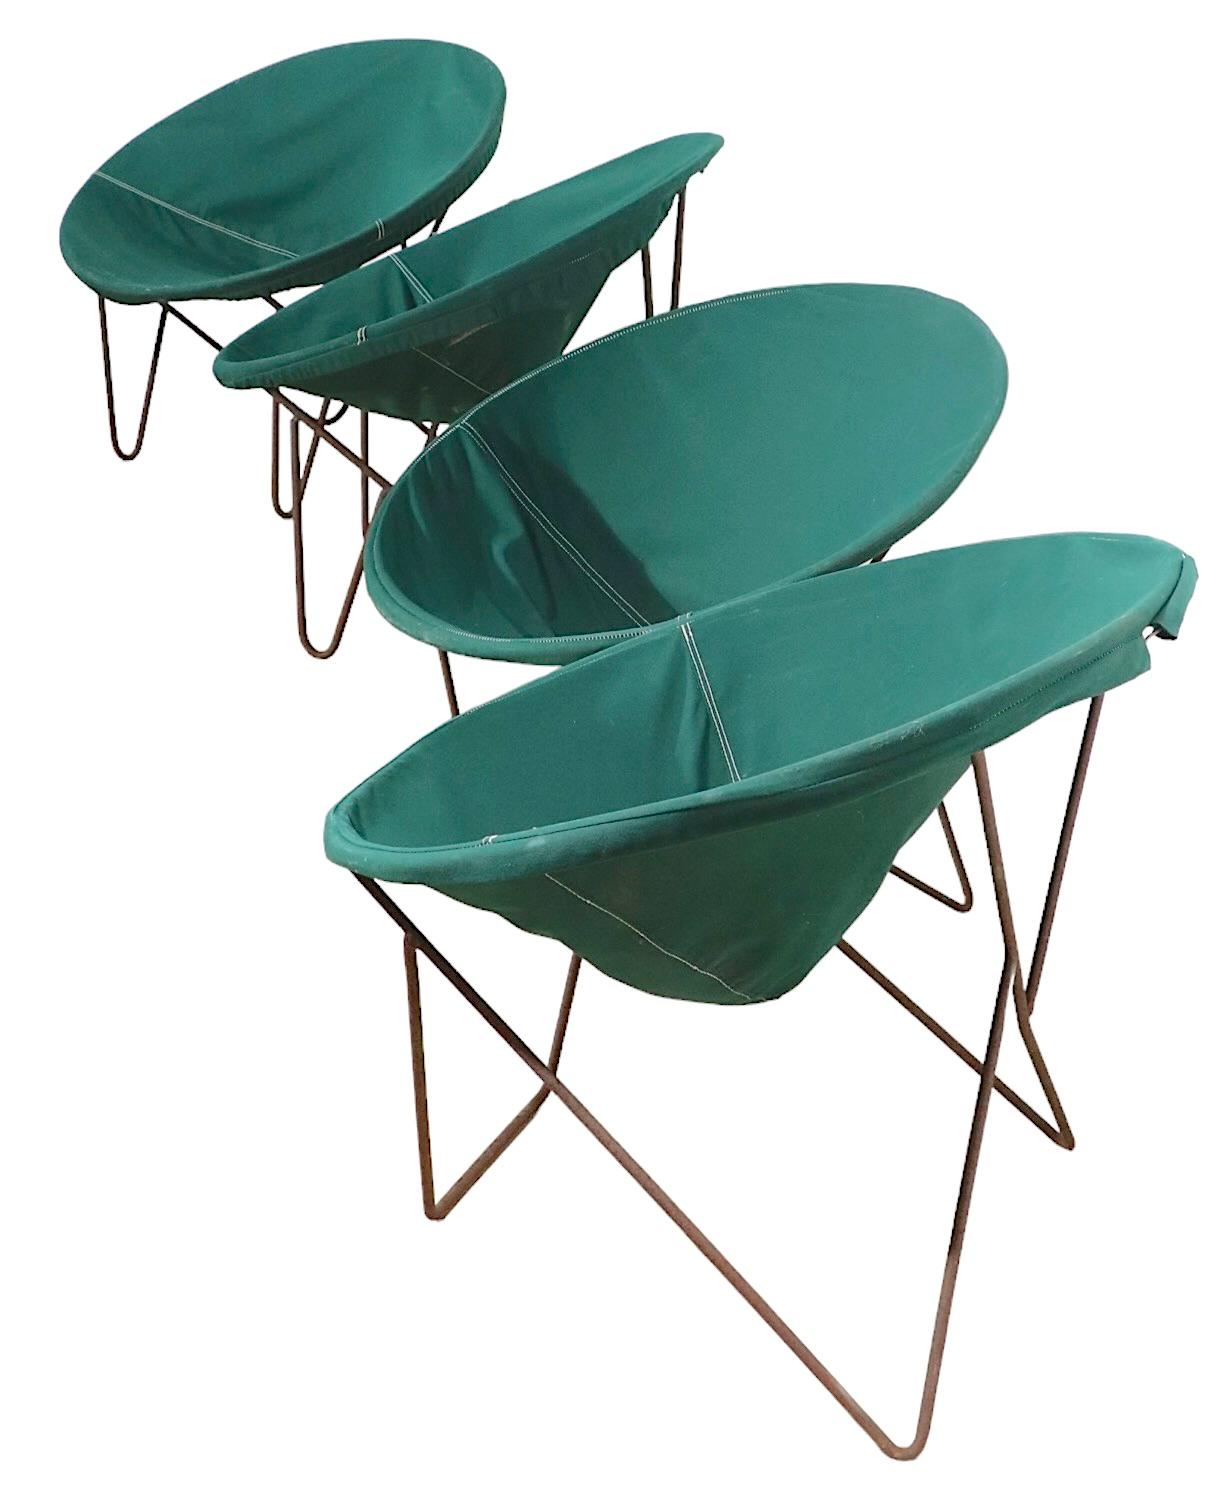 Mid Century Wrought Iron and Canvass Hoop Chairs 4 Available Att. to Hedstrom For Sale 4